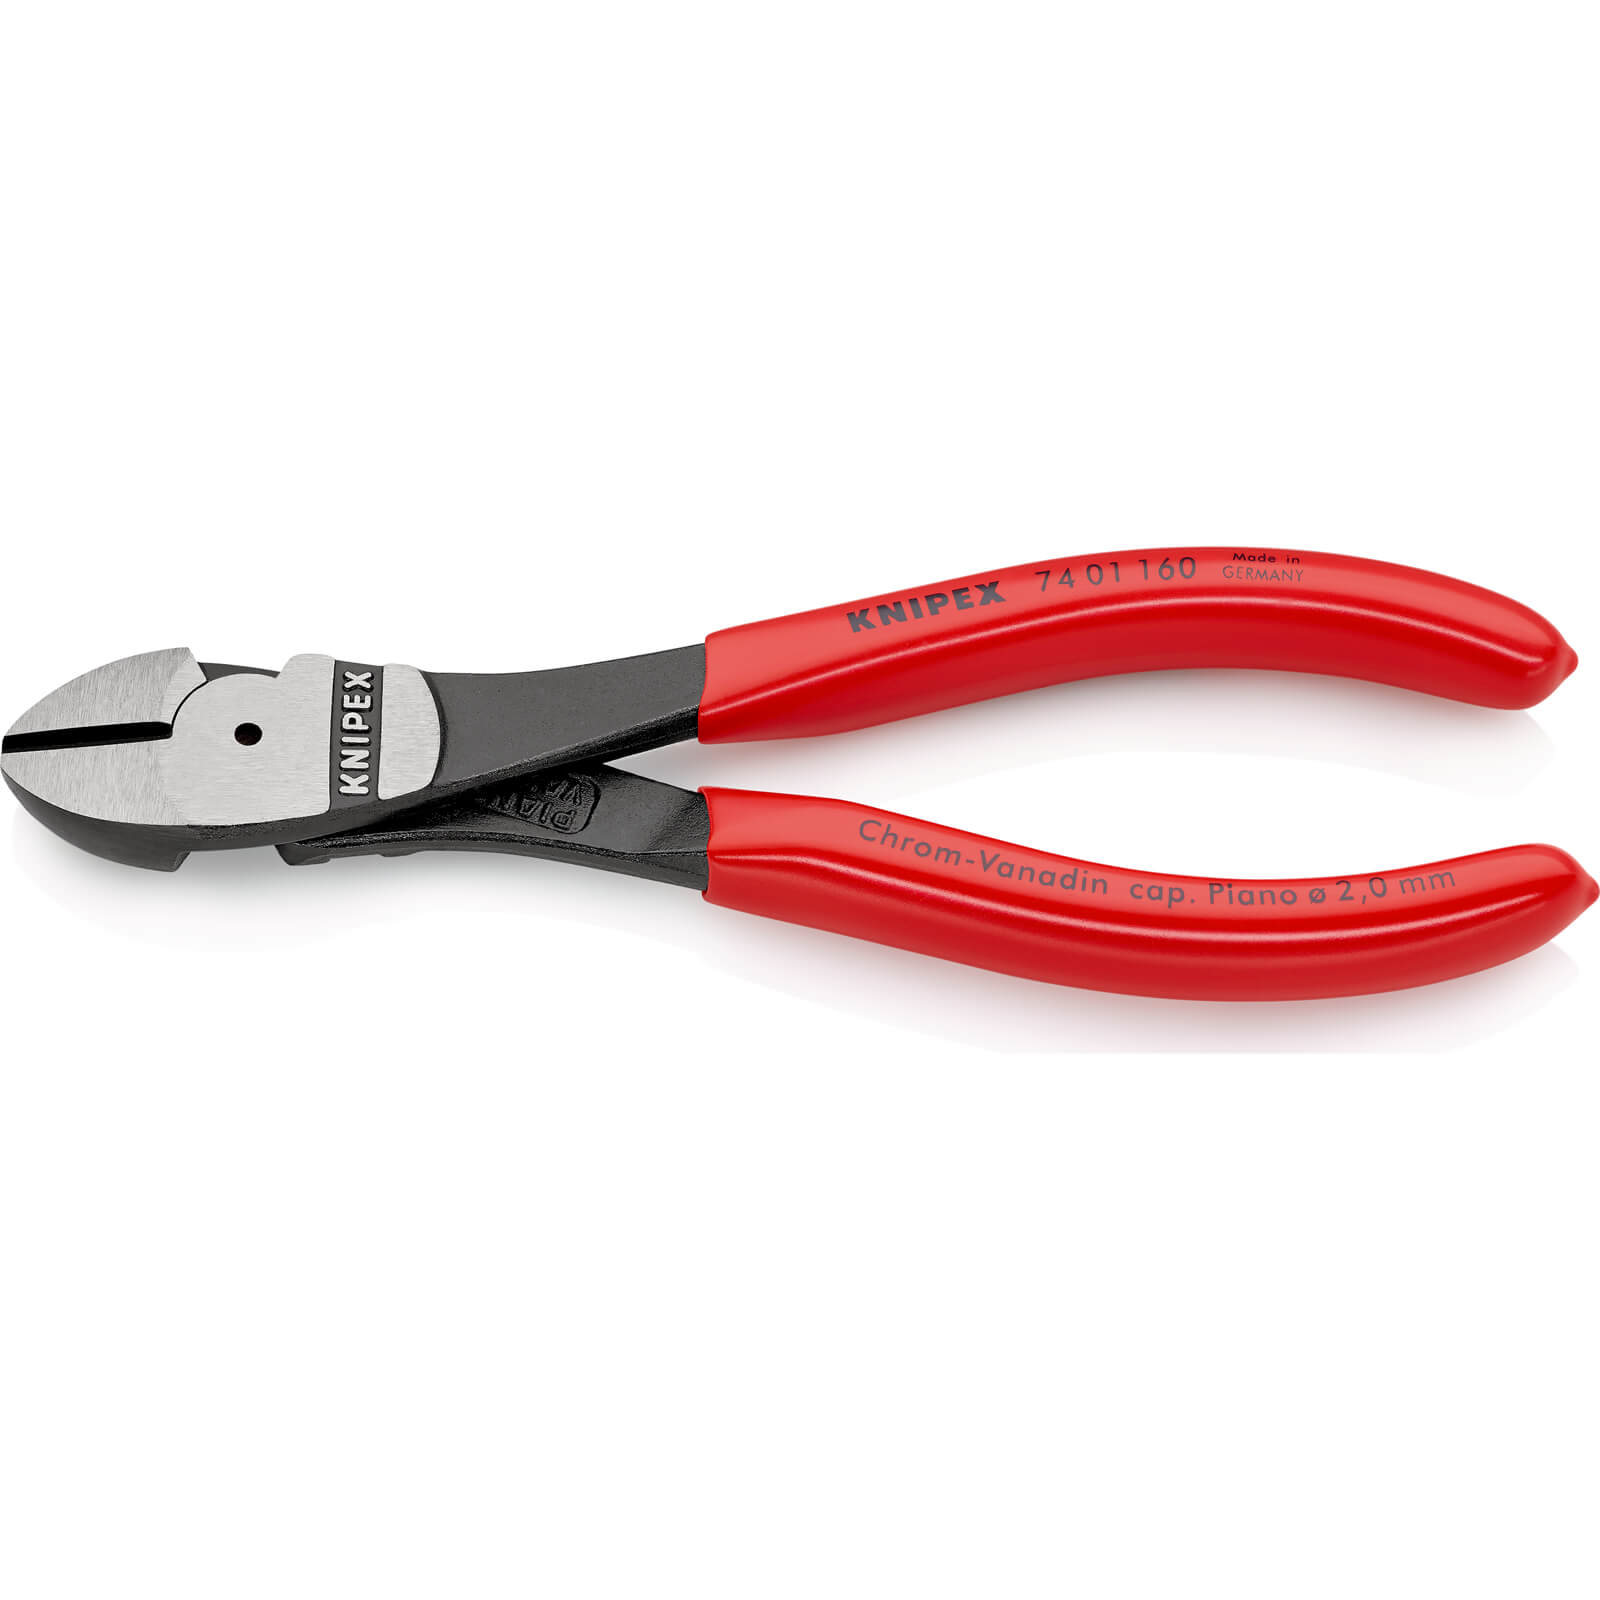 Image of Knipex 74 01 High Leverage Diagonal Cutting Pliers 160mm